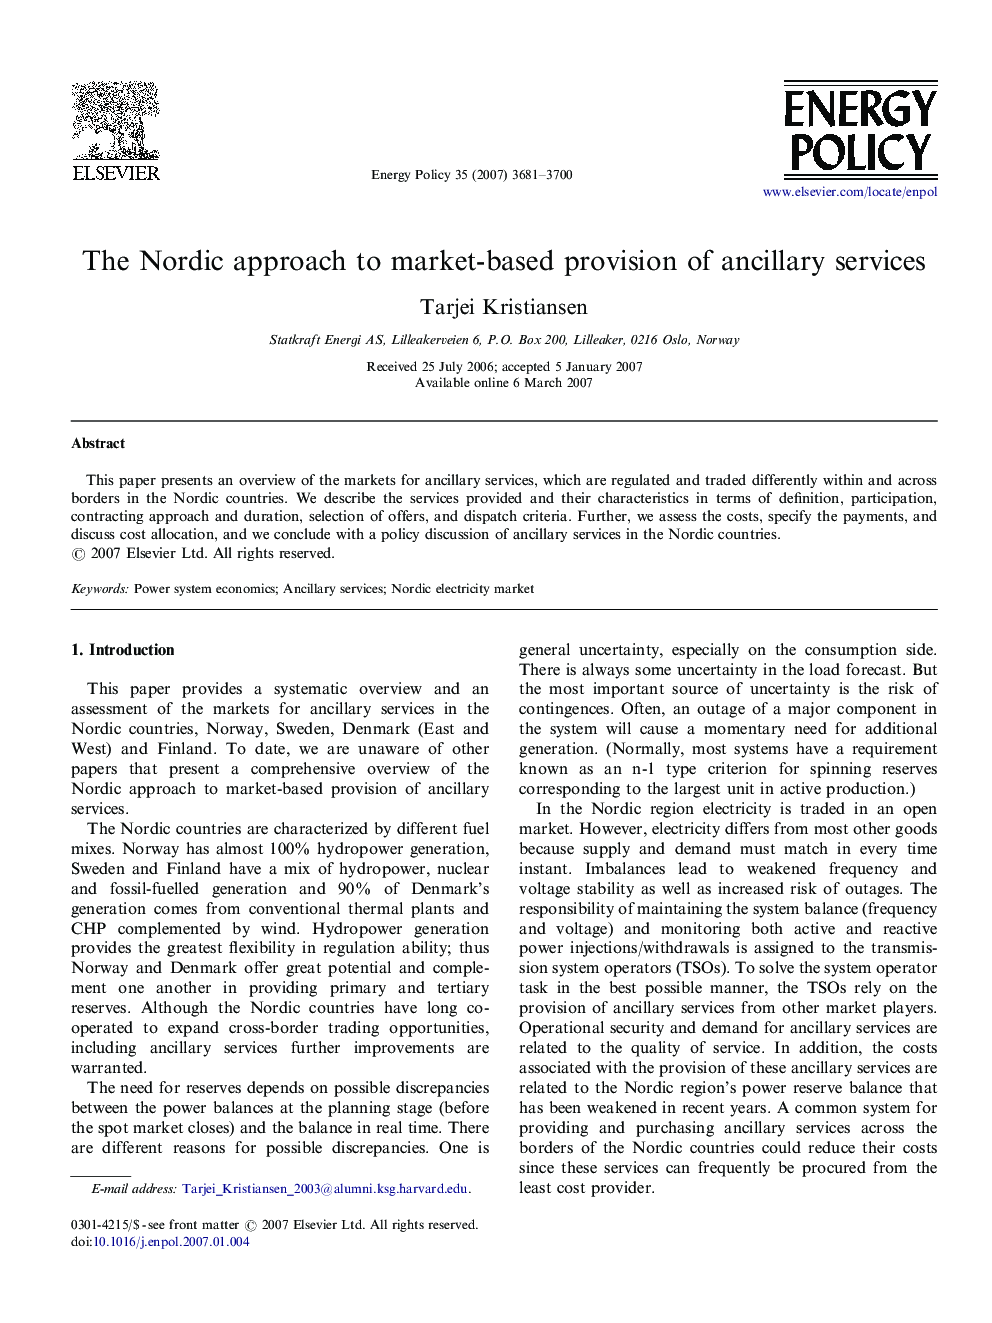 The Nordic approach to market-based provision of ancillary services